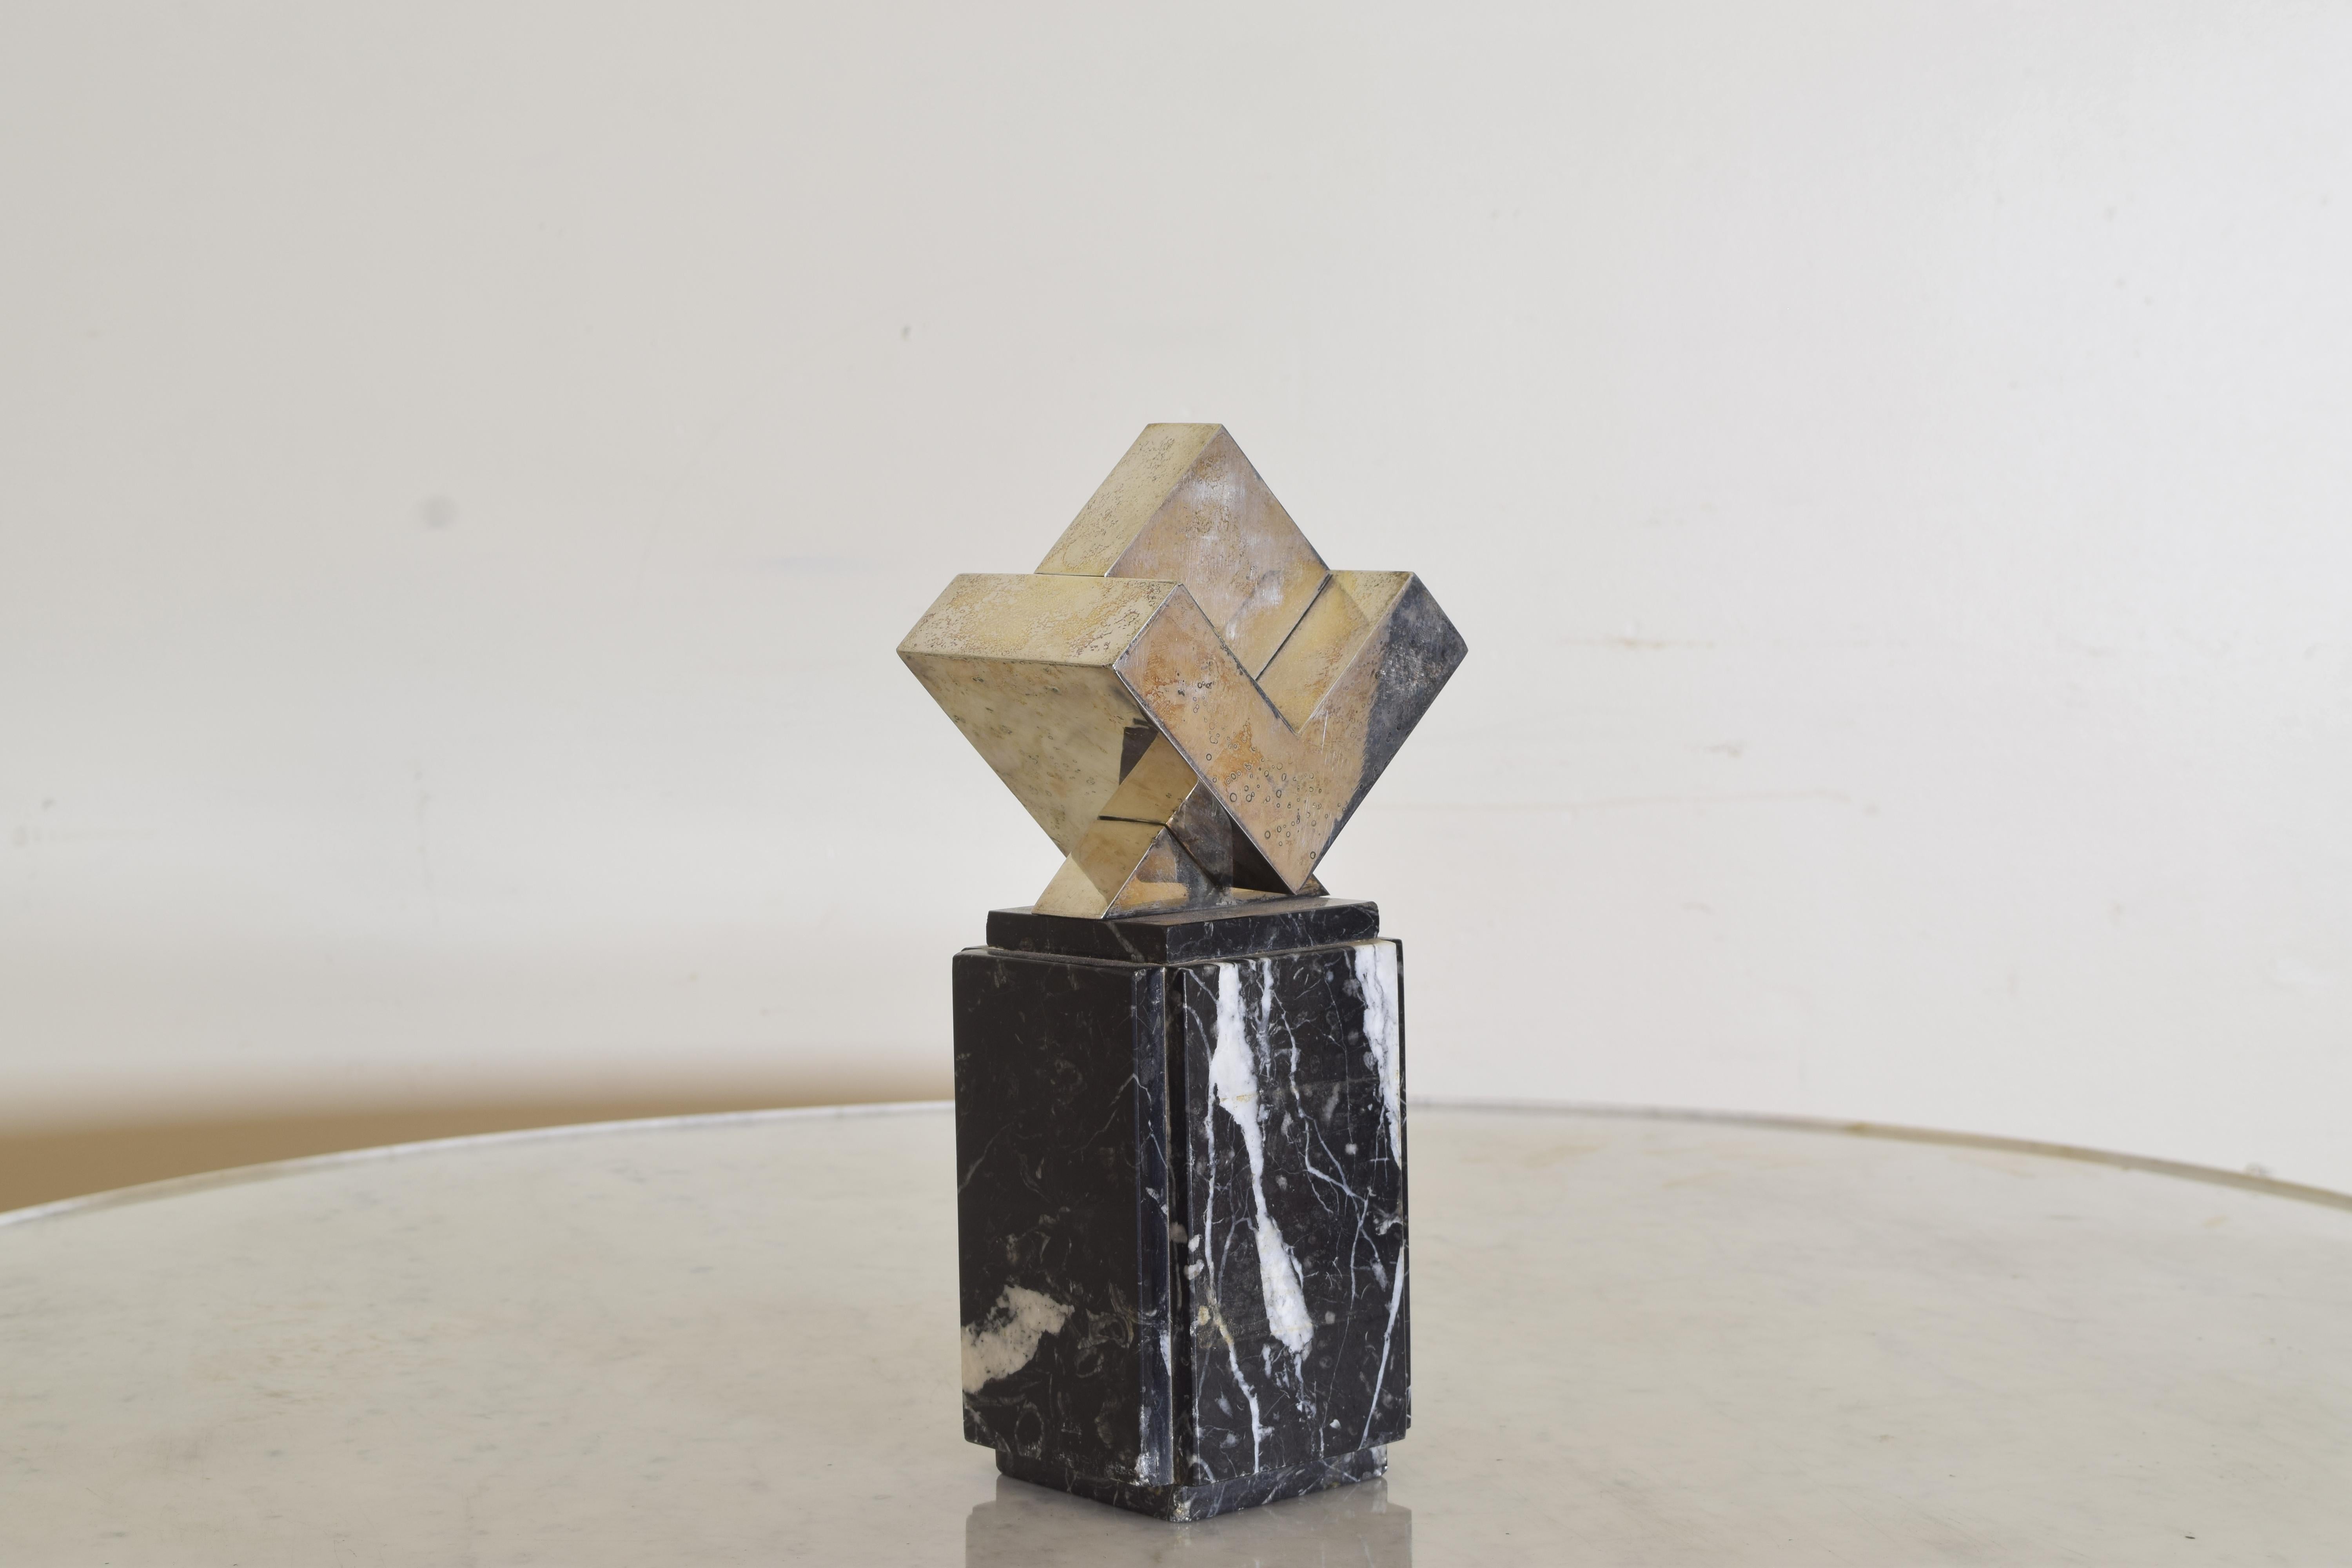 the sculpture is an abstract intertwined cube balancing on a corner mounted atop a marble stand.